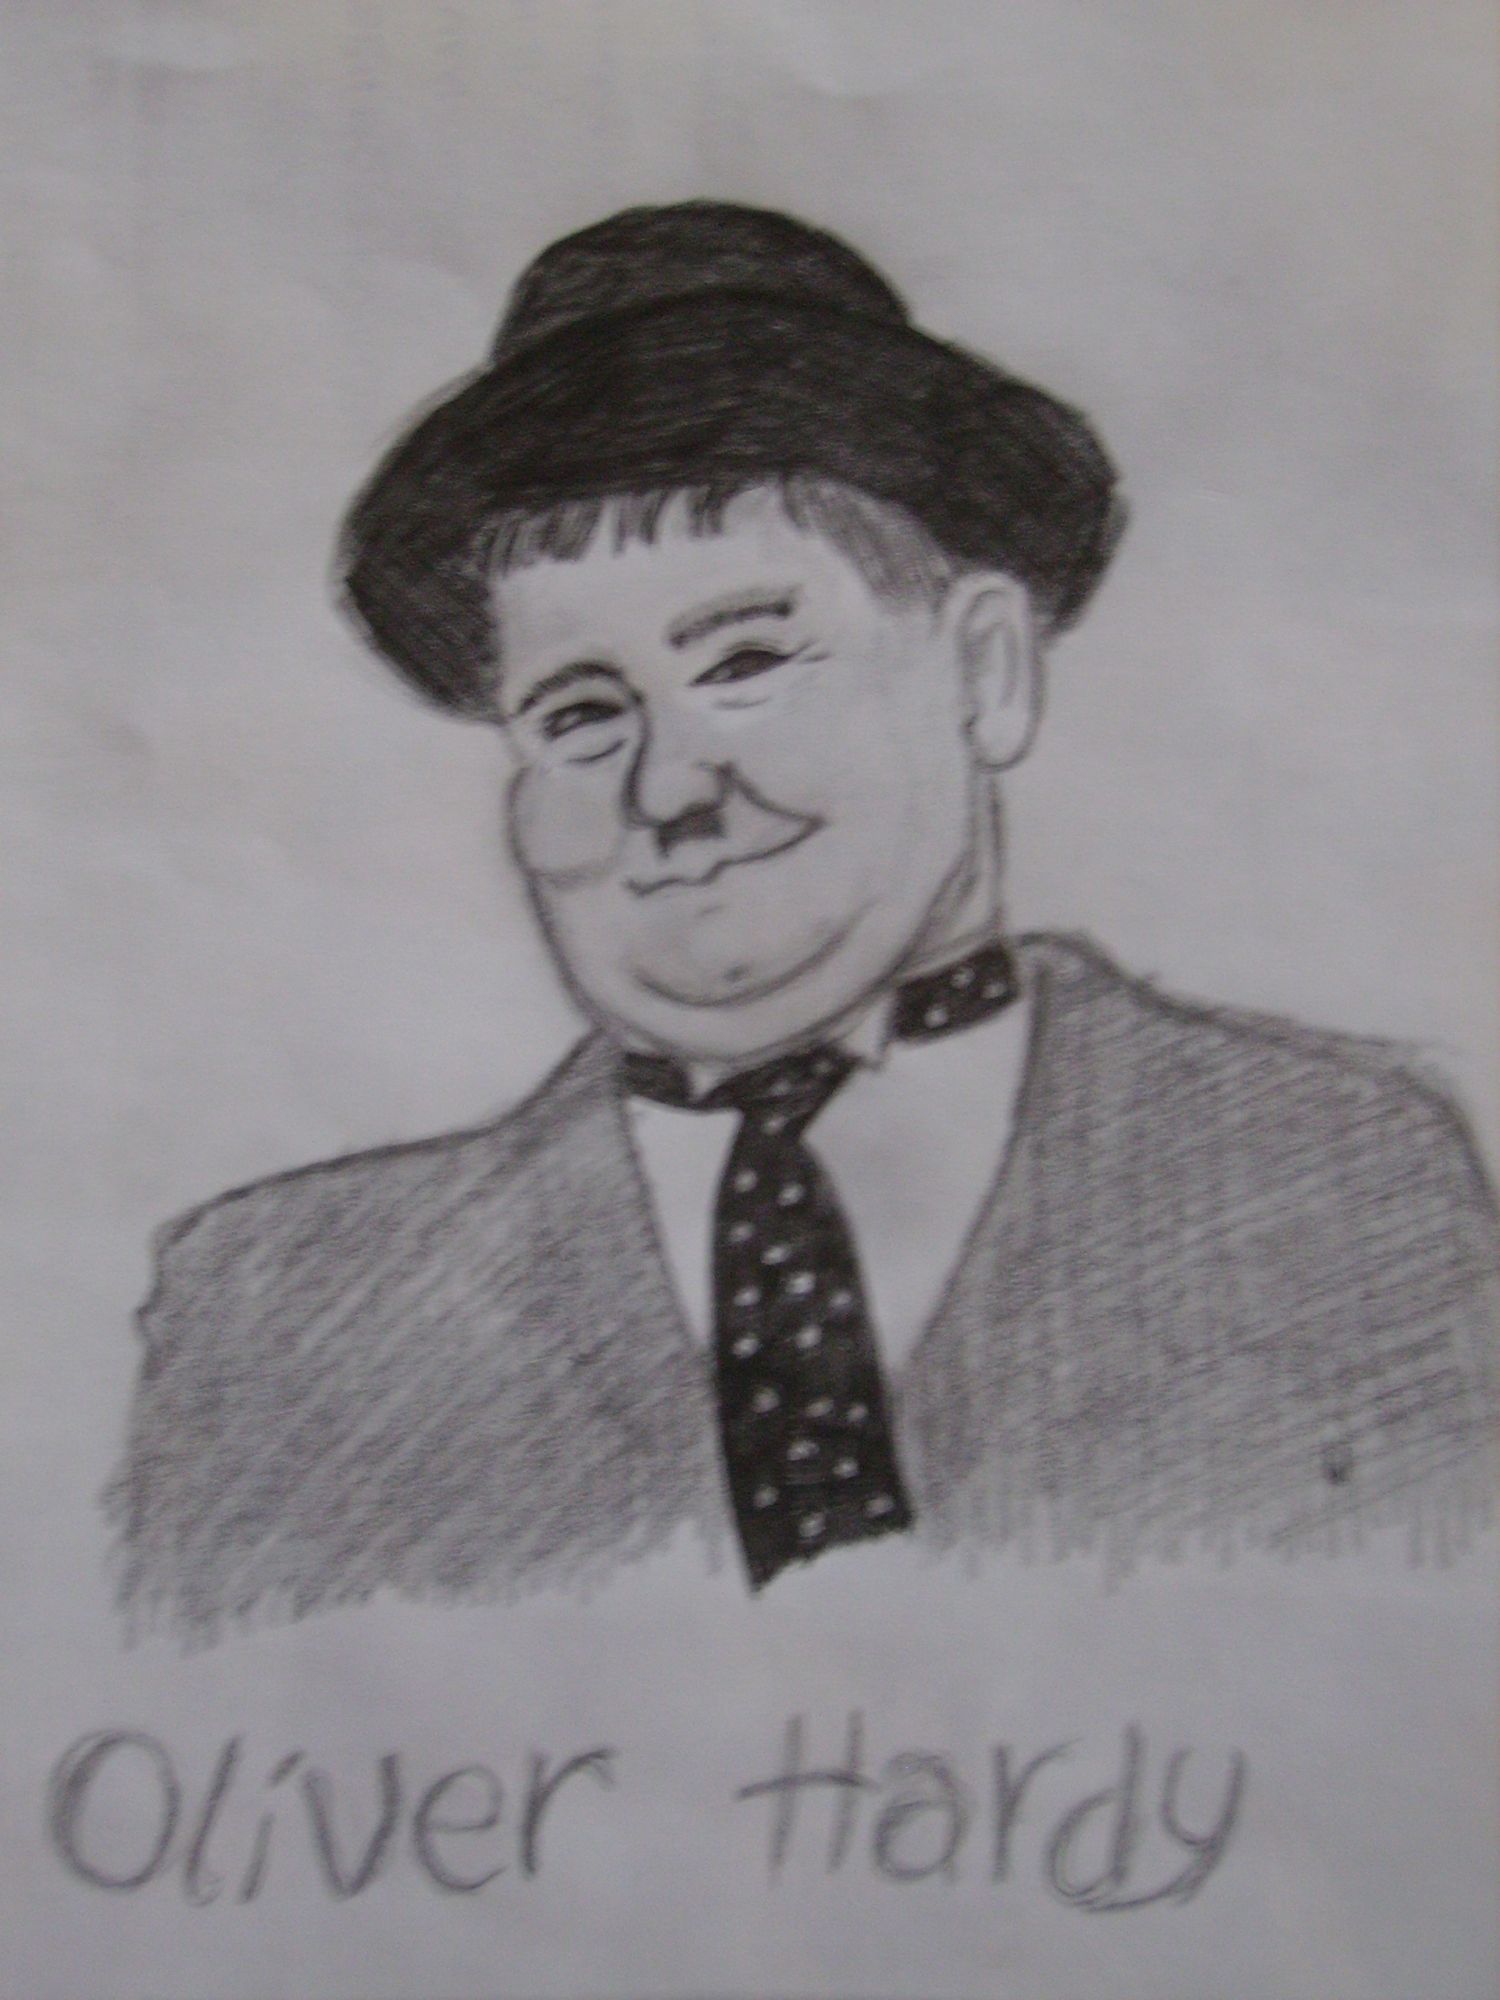 Oliver Hardy by Iskeanime16